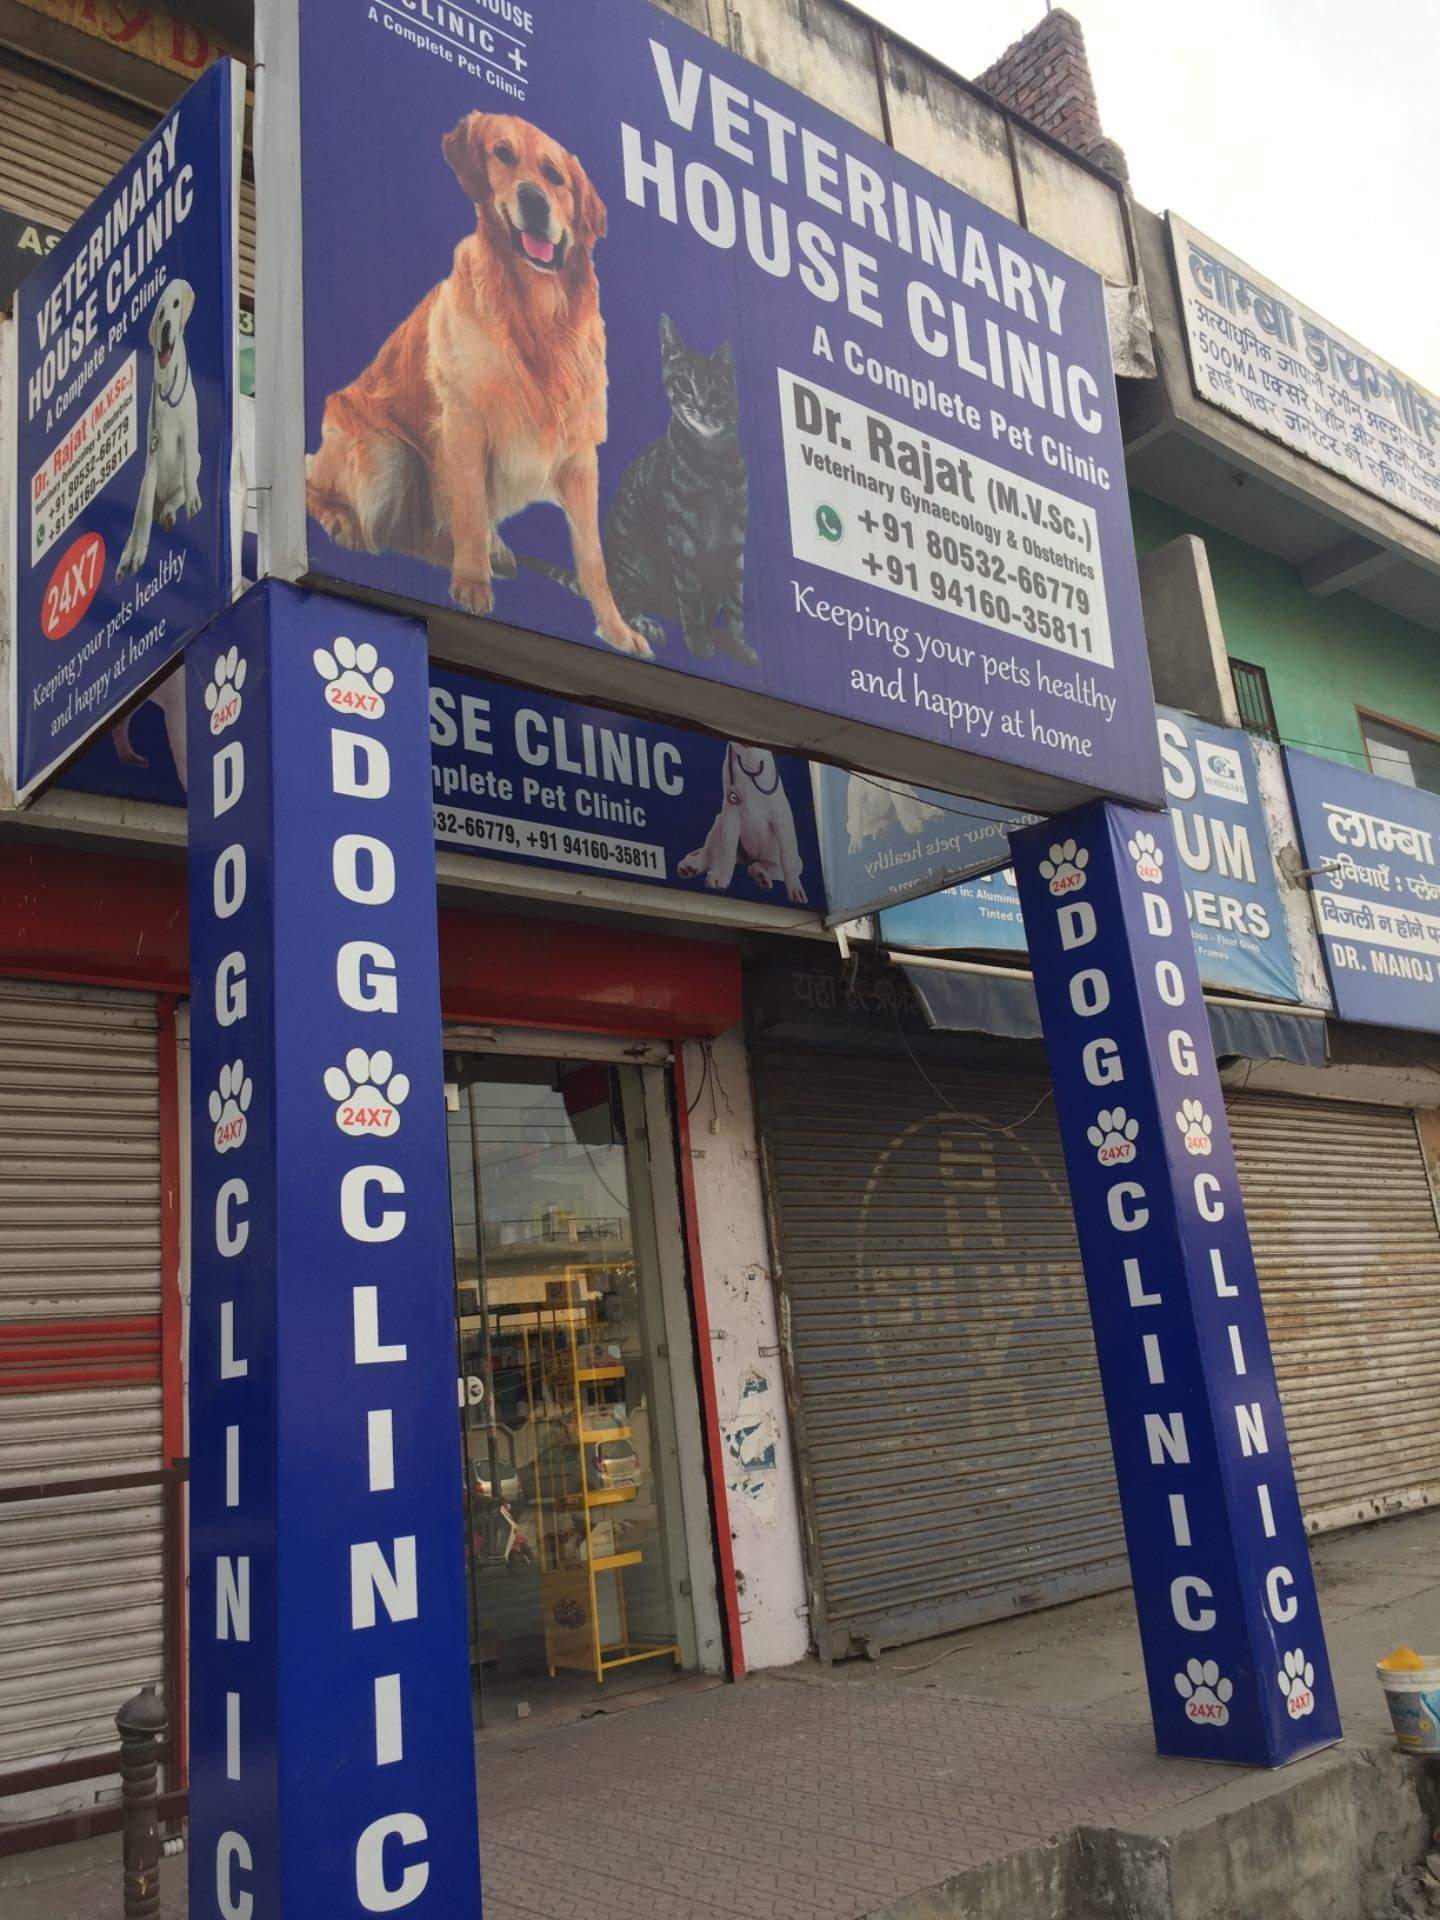 Veterinary House Clinic|Clinics|Medical Services